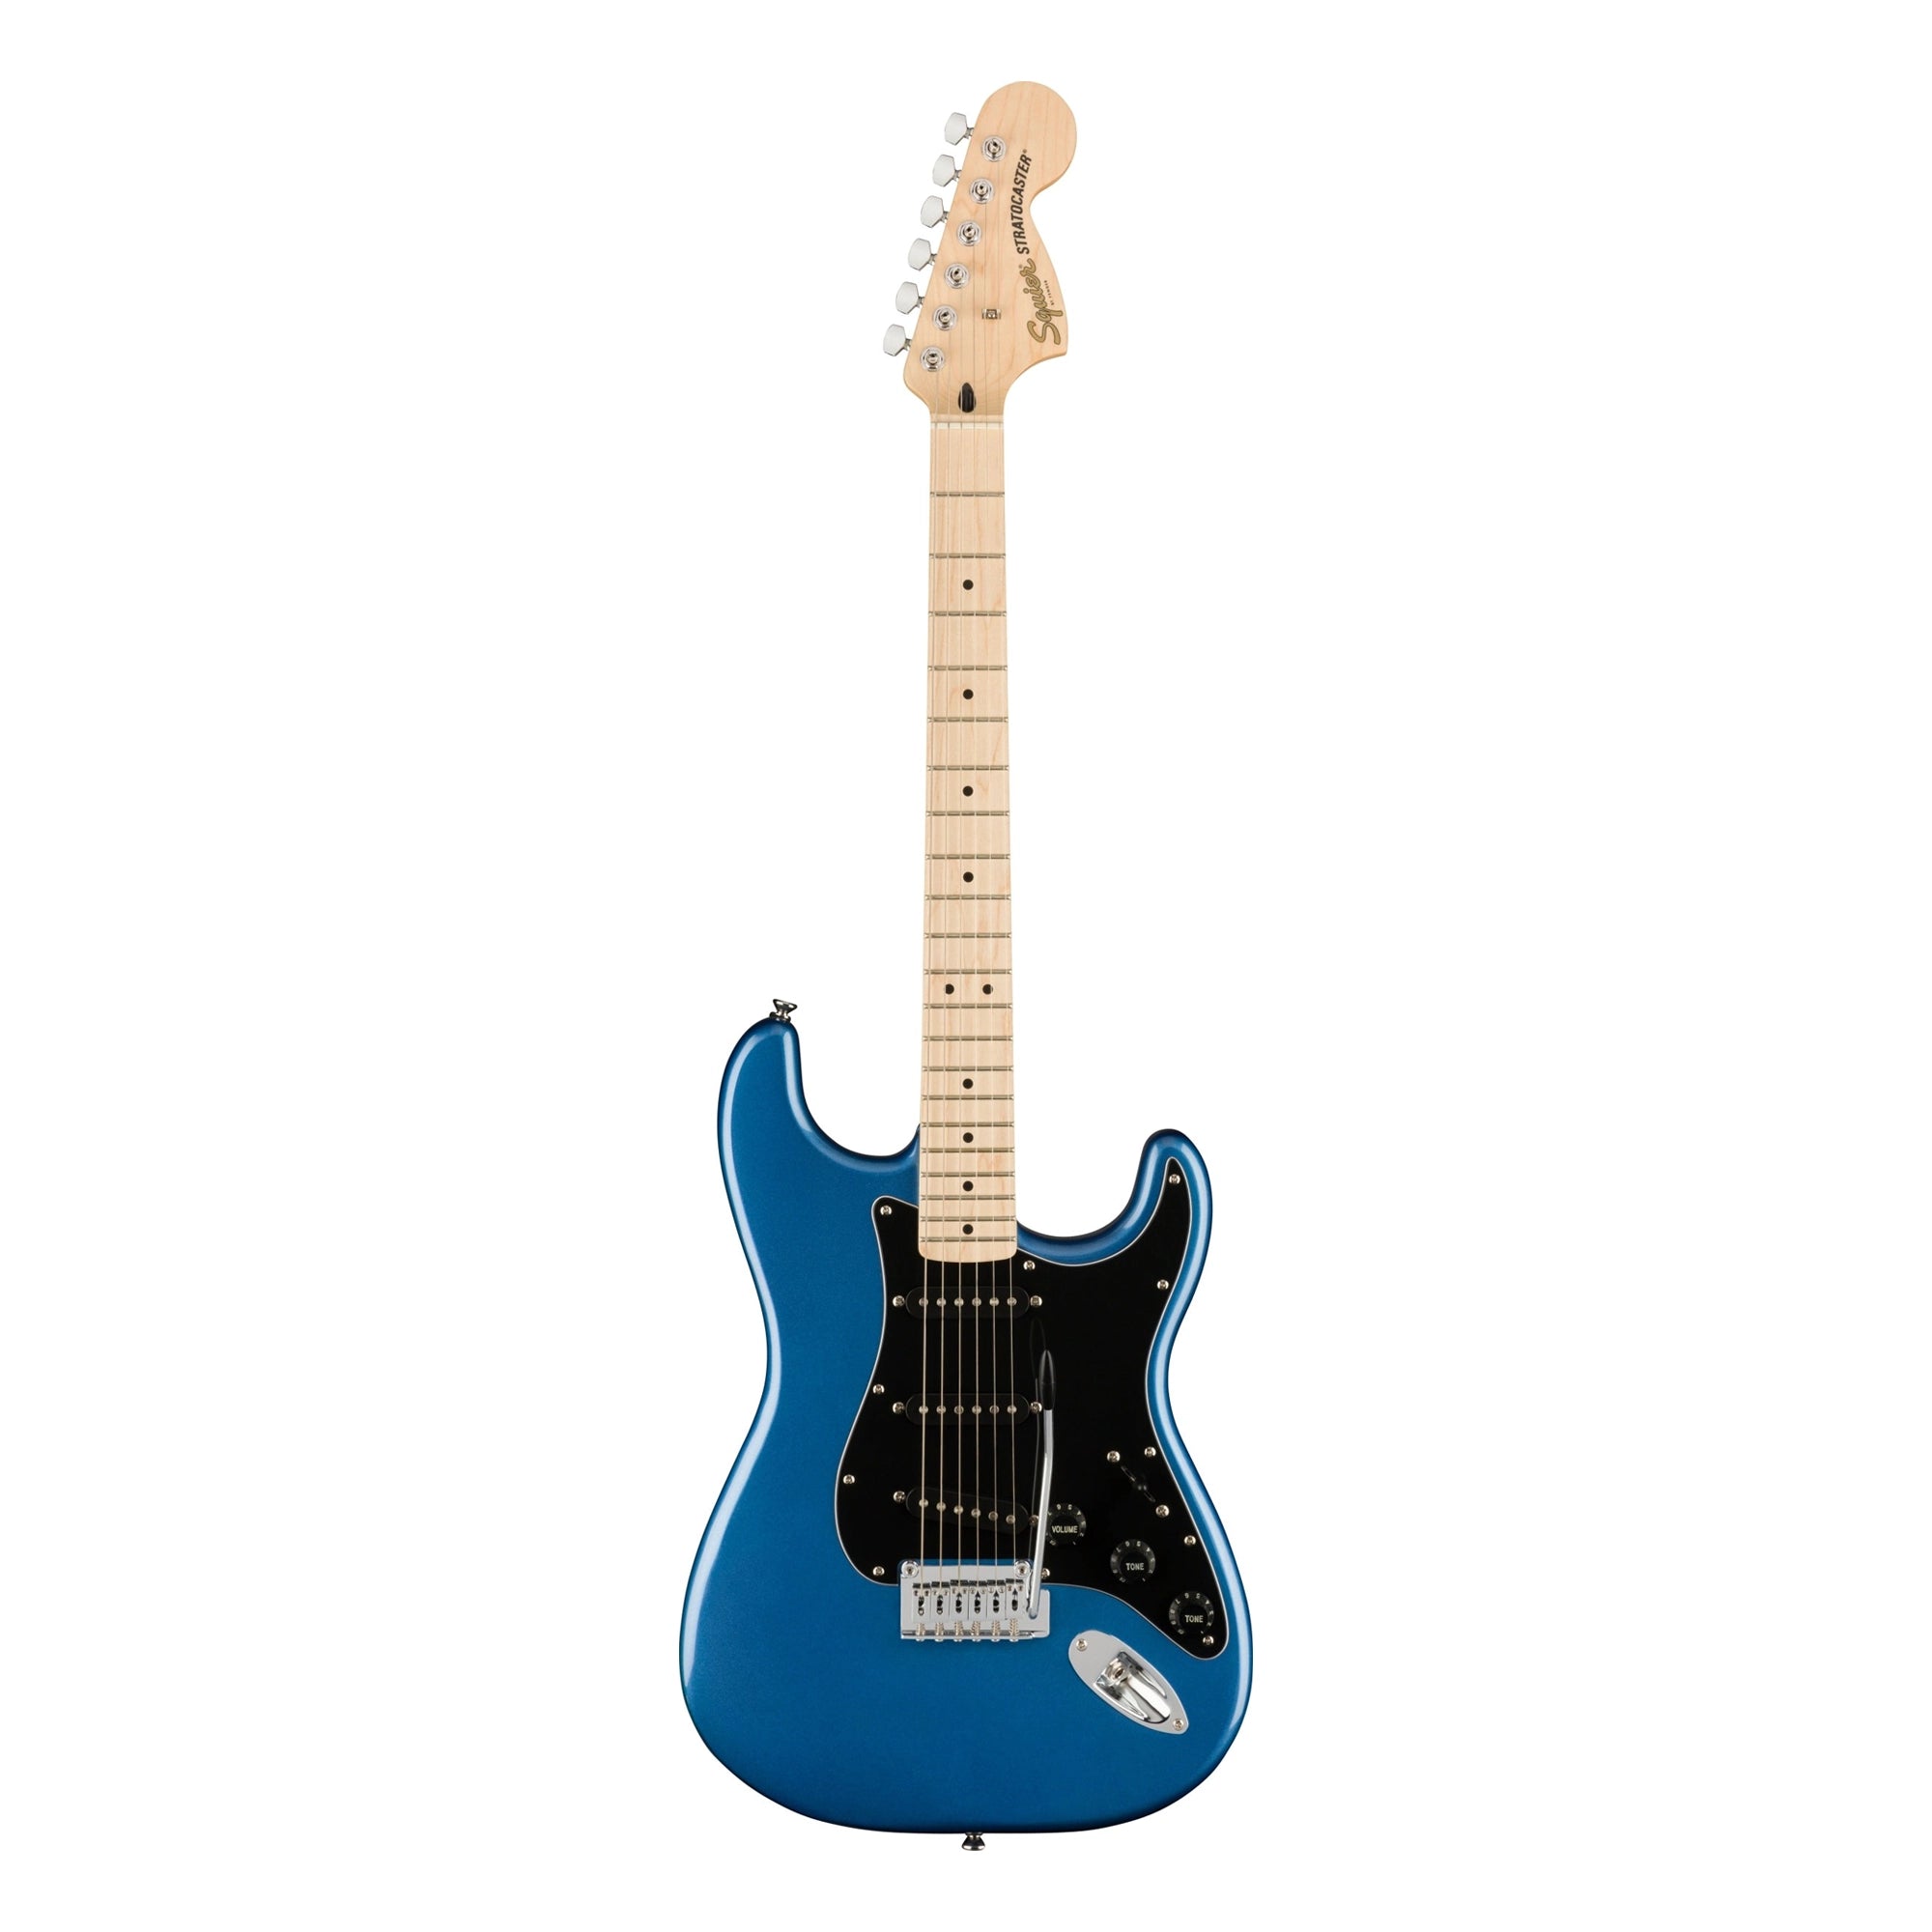 Squier Affinity Series Stratocaster Electric Guitar - Lake Placid Blue